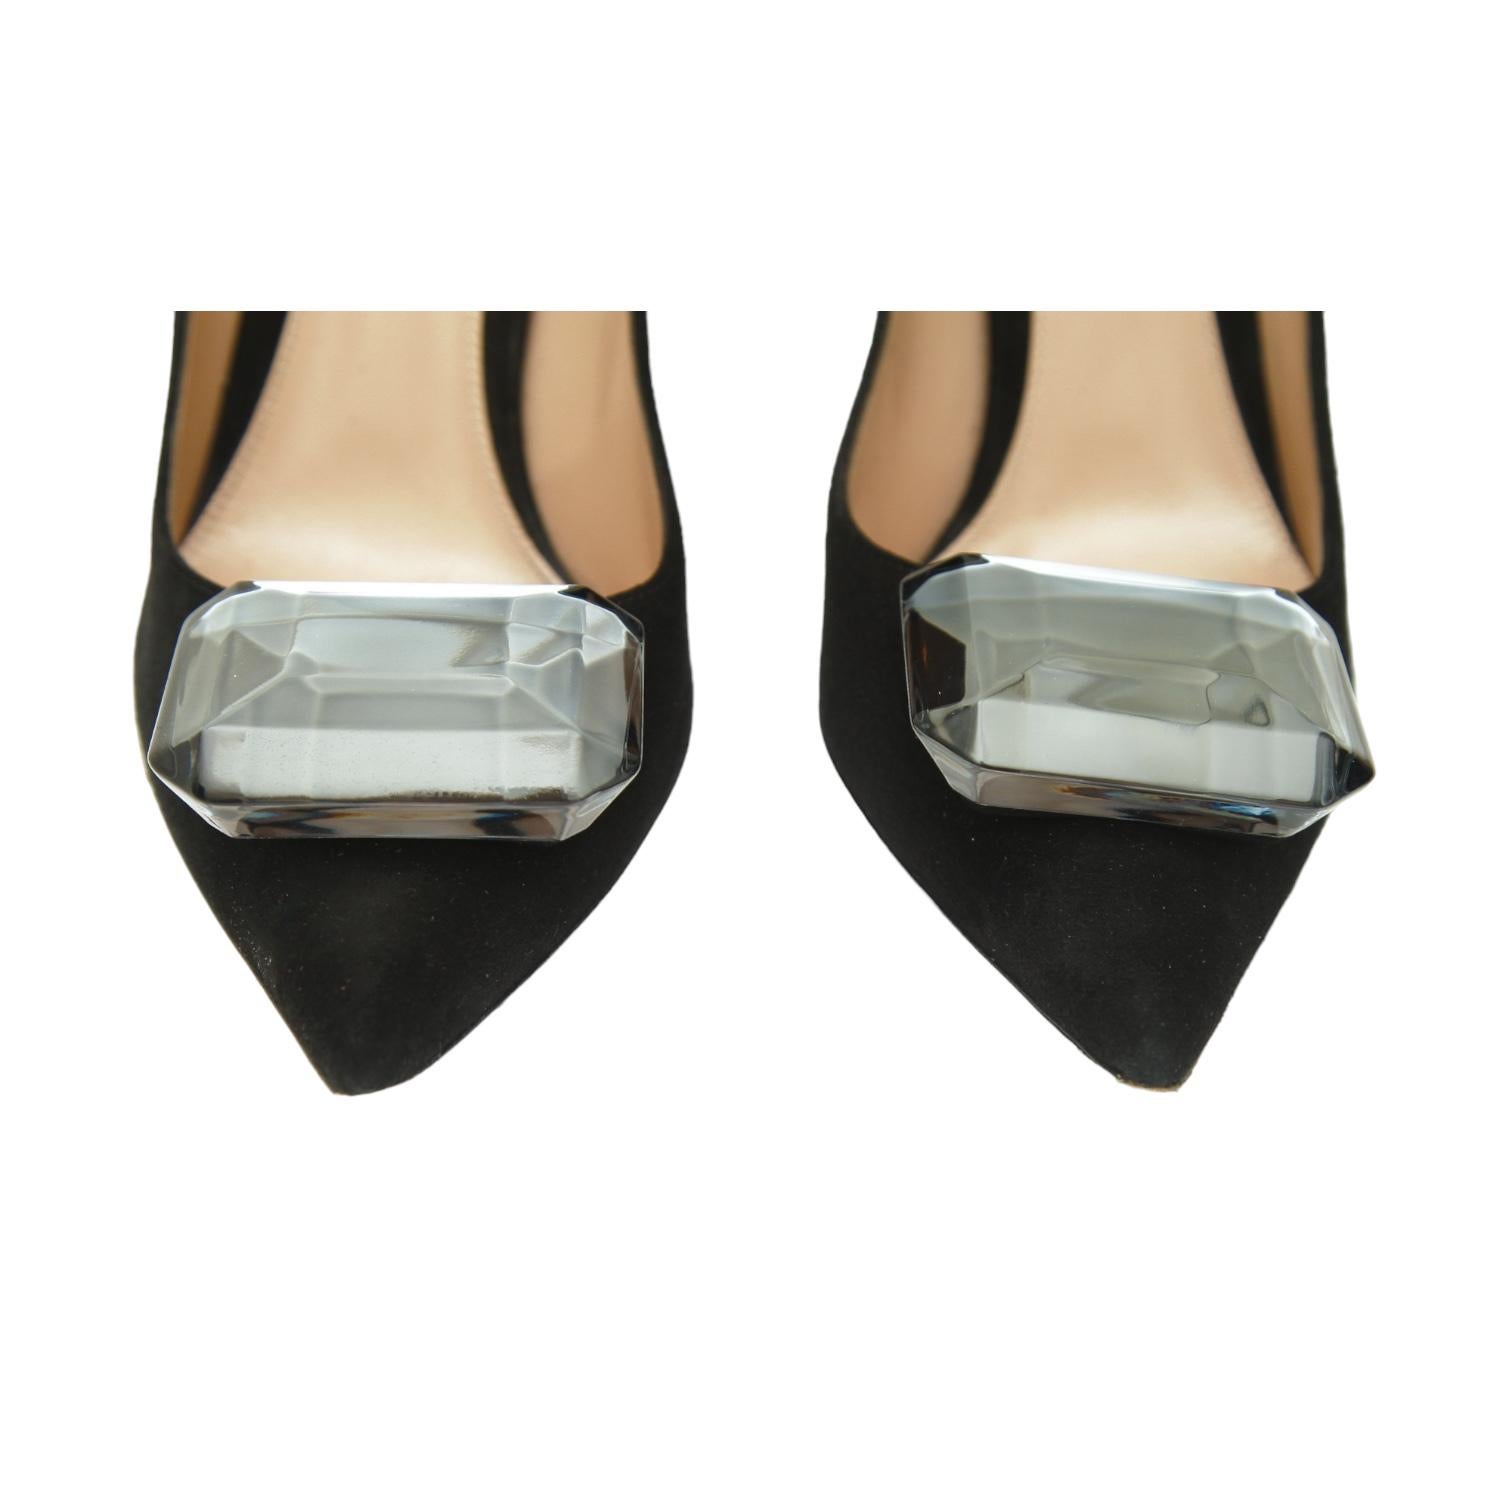 GIANVITO ROSSI Black Suede Leather Pump JAIPUR Crystal Pointed Toe 38 $1200 For Sale 2